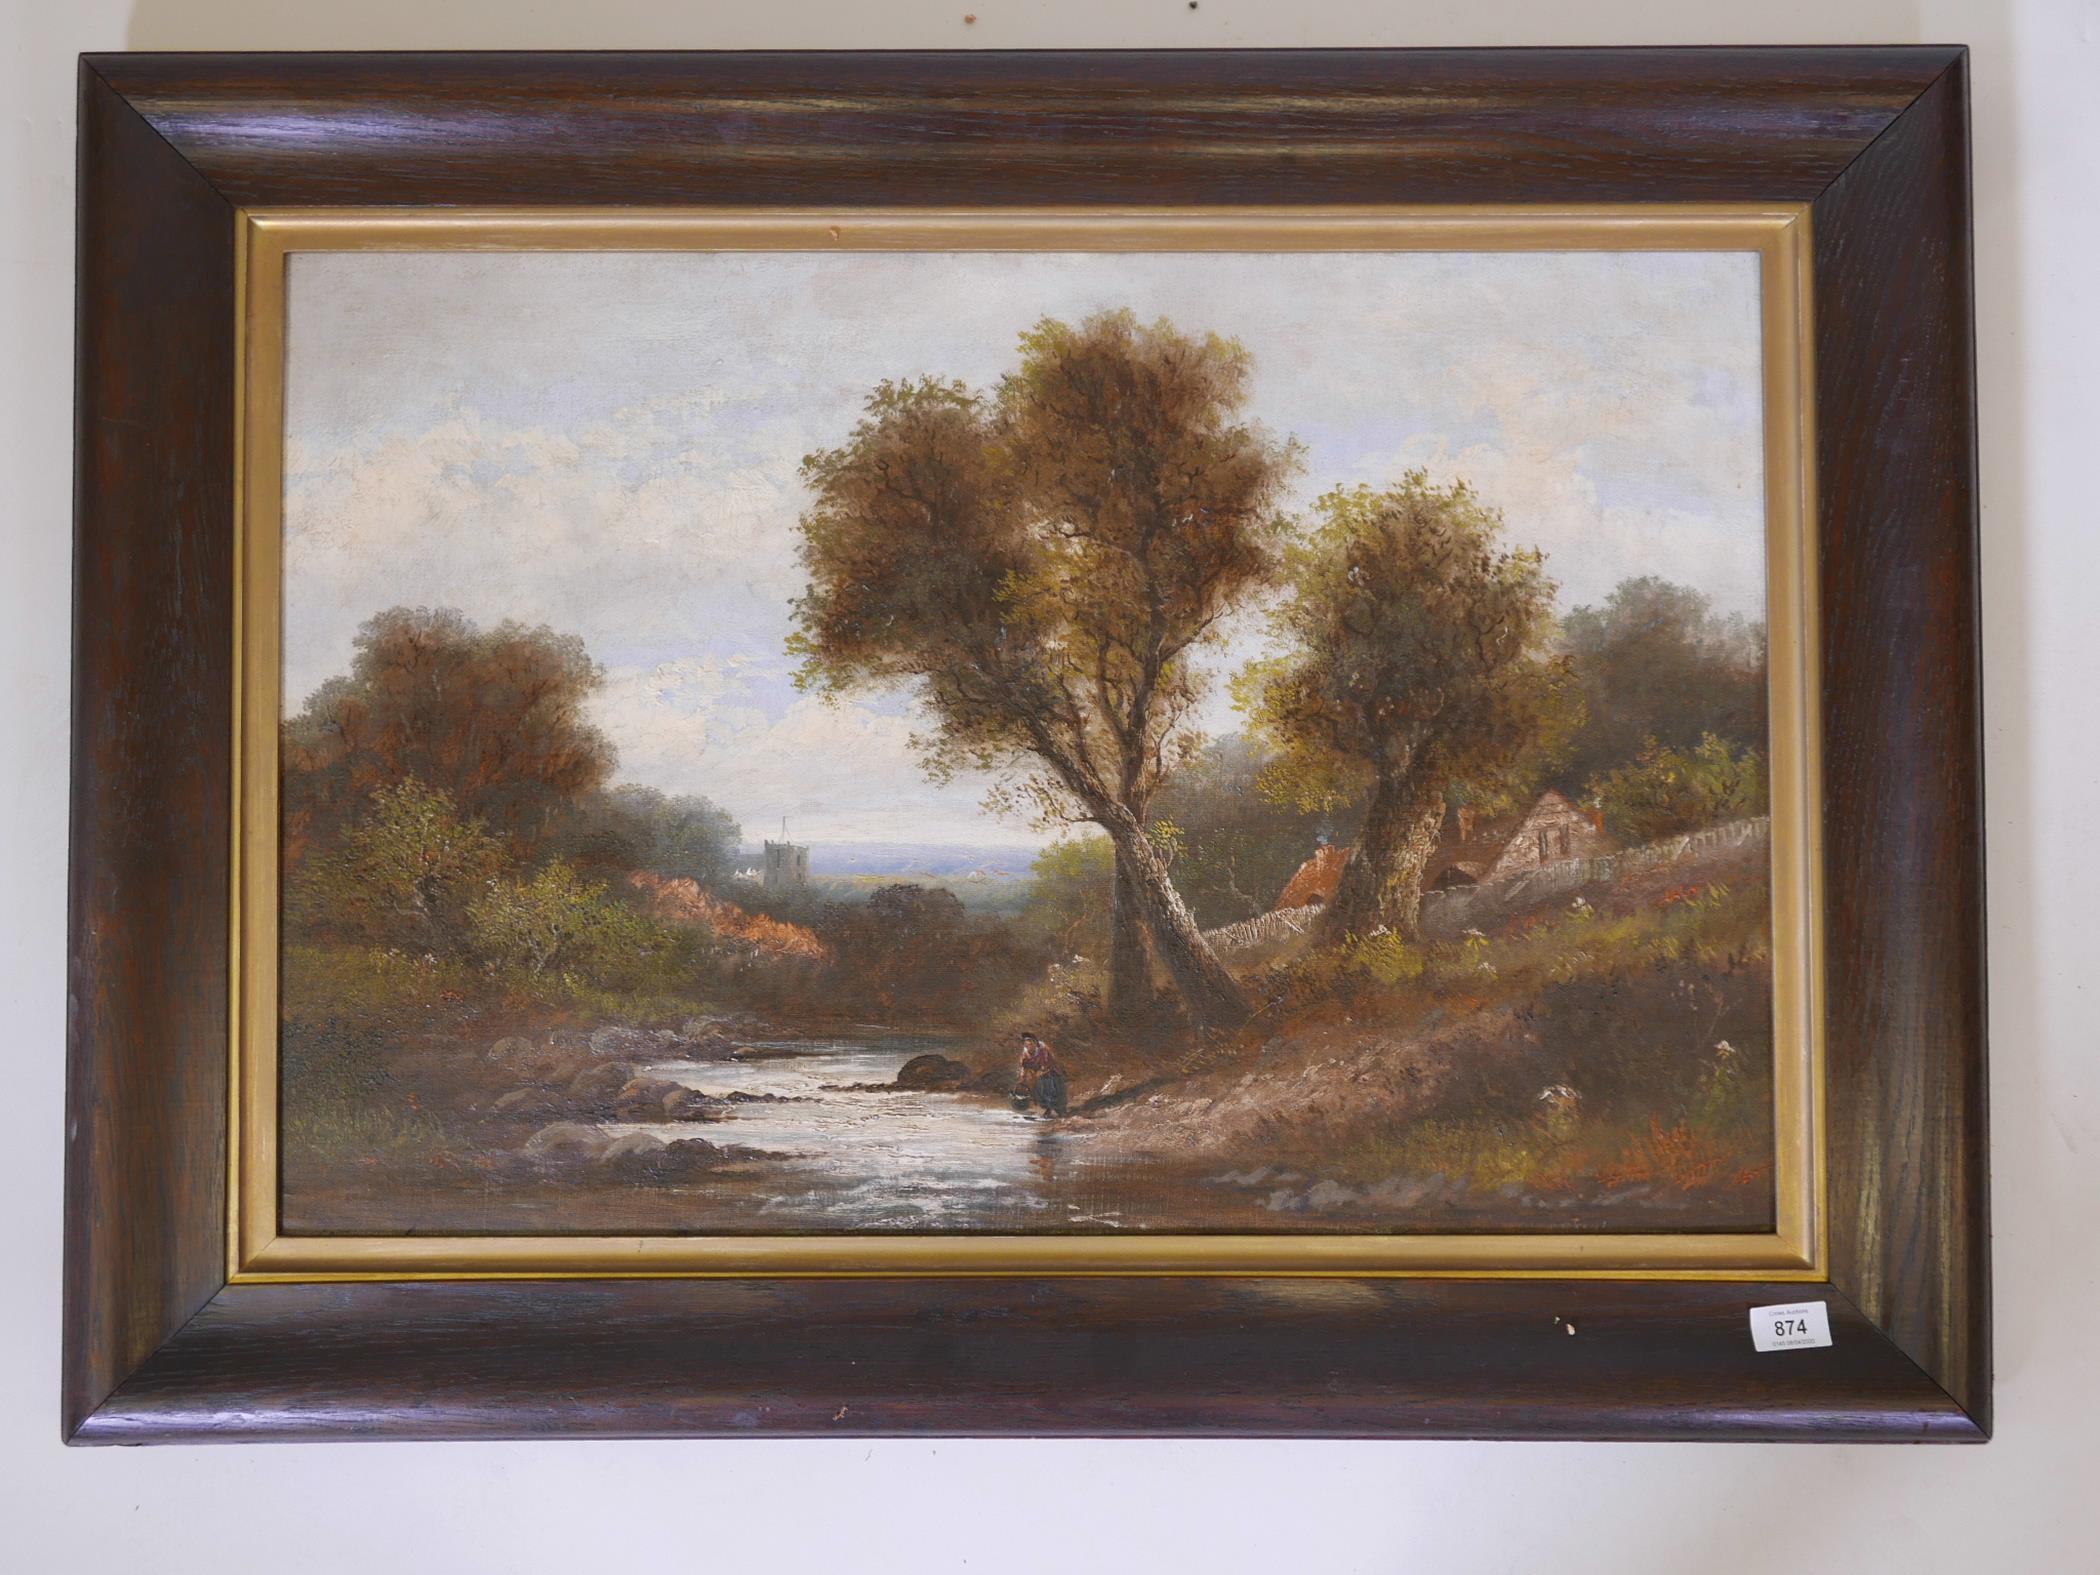 Attributed to E. Horton, landscape with woman by a stream, unsigned, 20" x 30" - Image 2 of 4